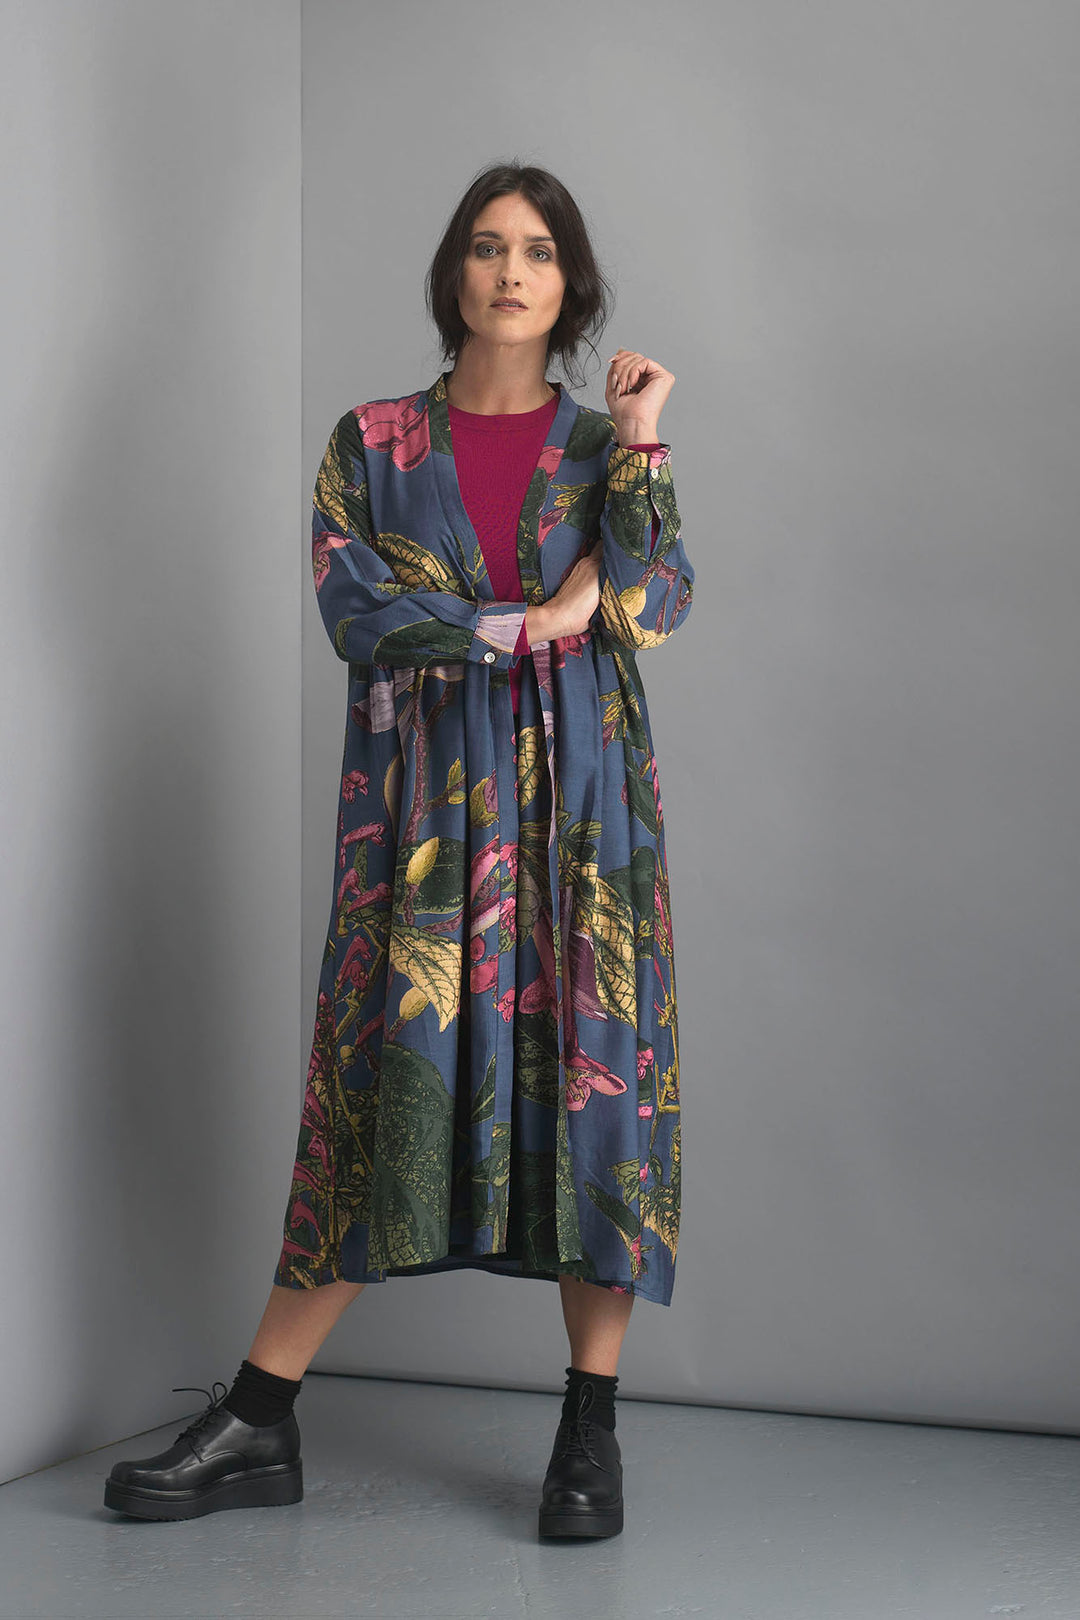 KEW Magnolia Blue Duster Coat- This stunning shape is both stylish and versatile, whether you choose to wear our duster coat as a luxurious house coat, as part of a chic ensemble during the day or over a little black dress during the evening.